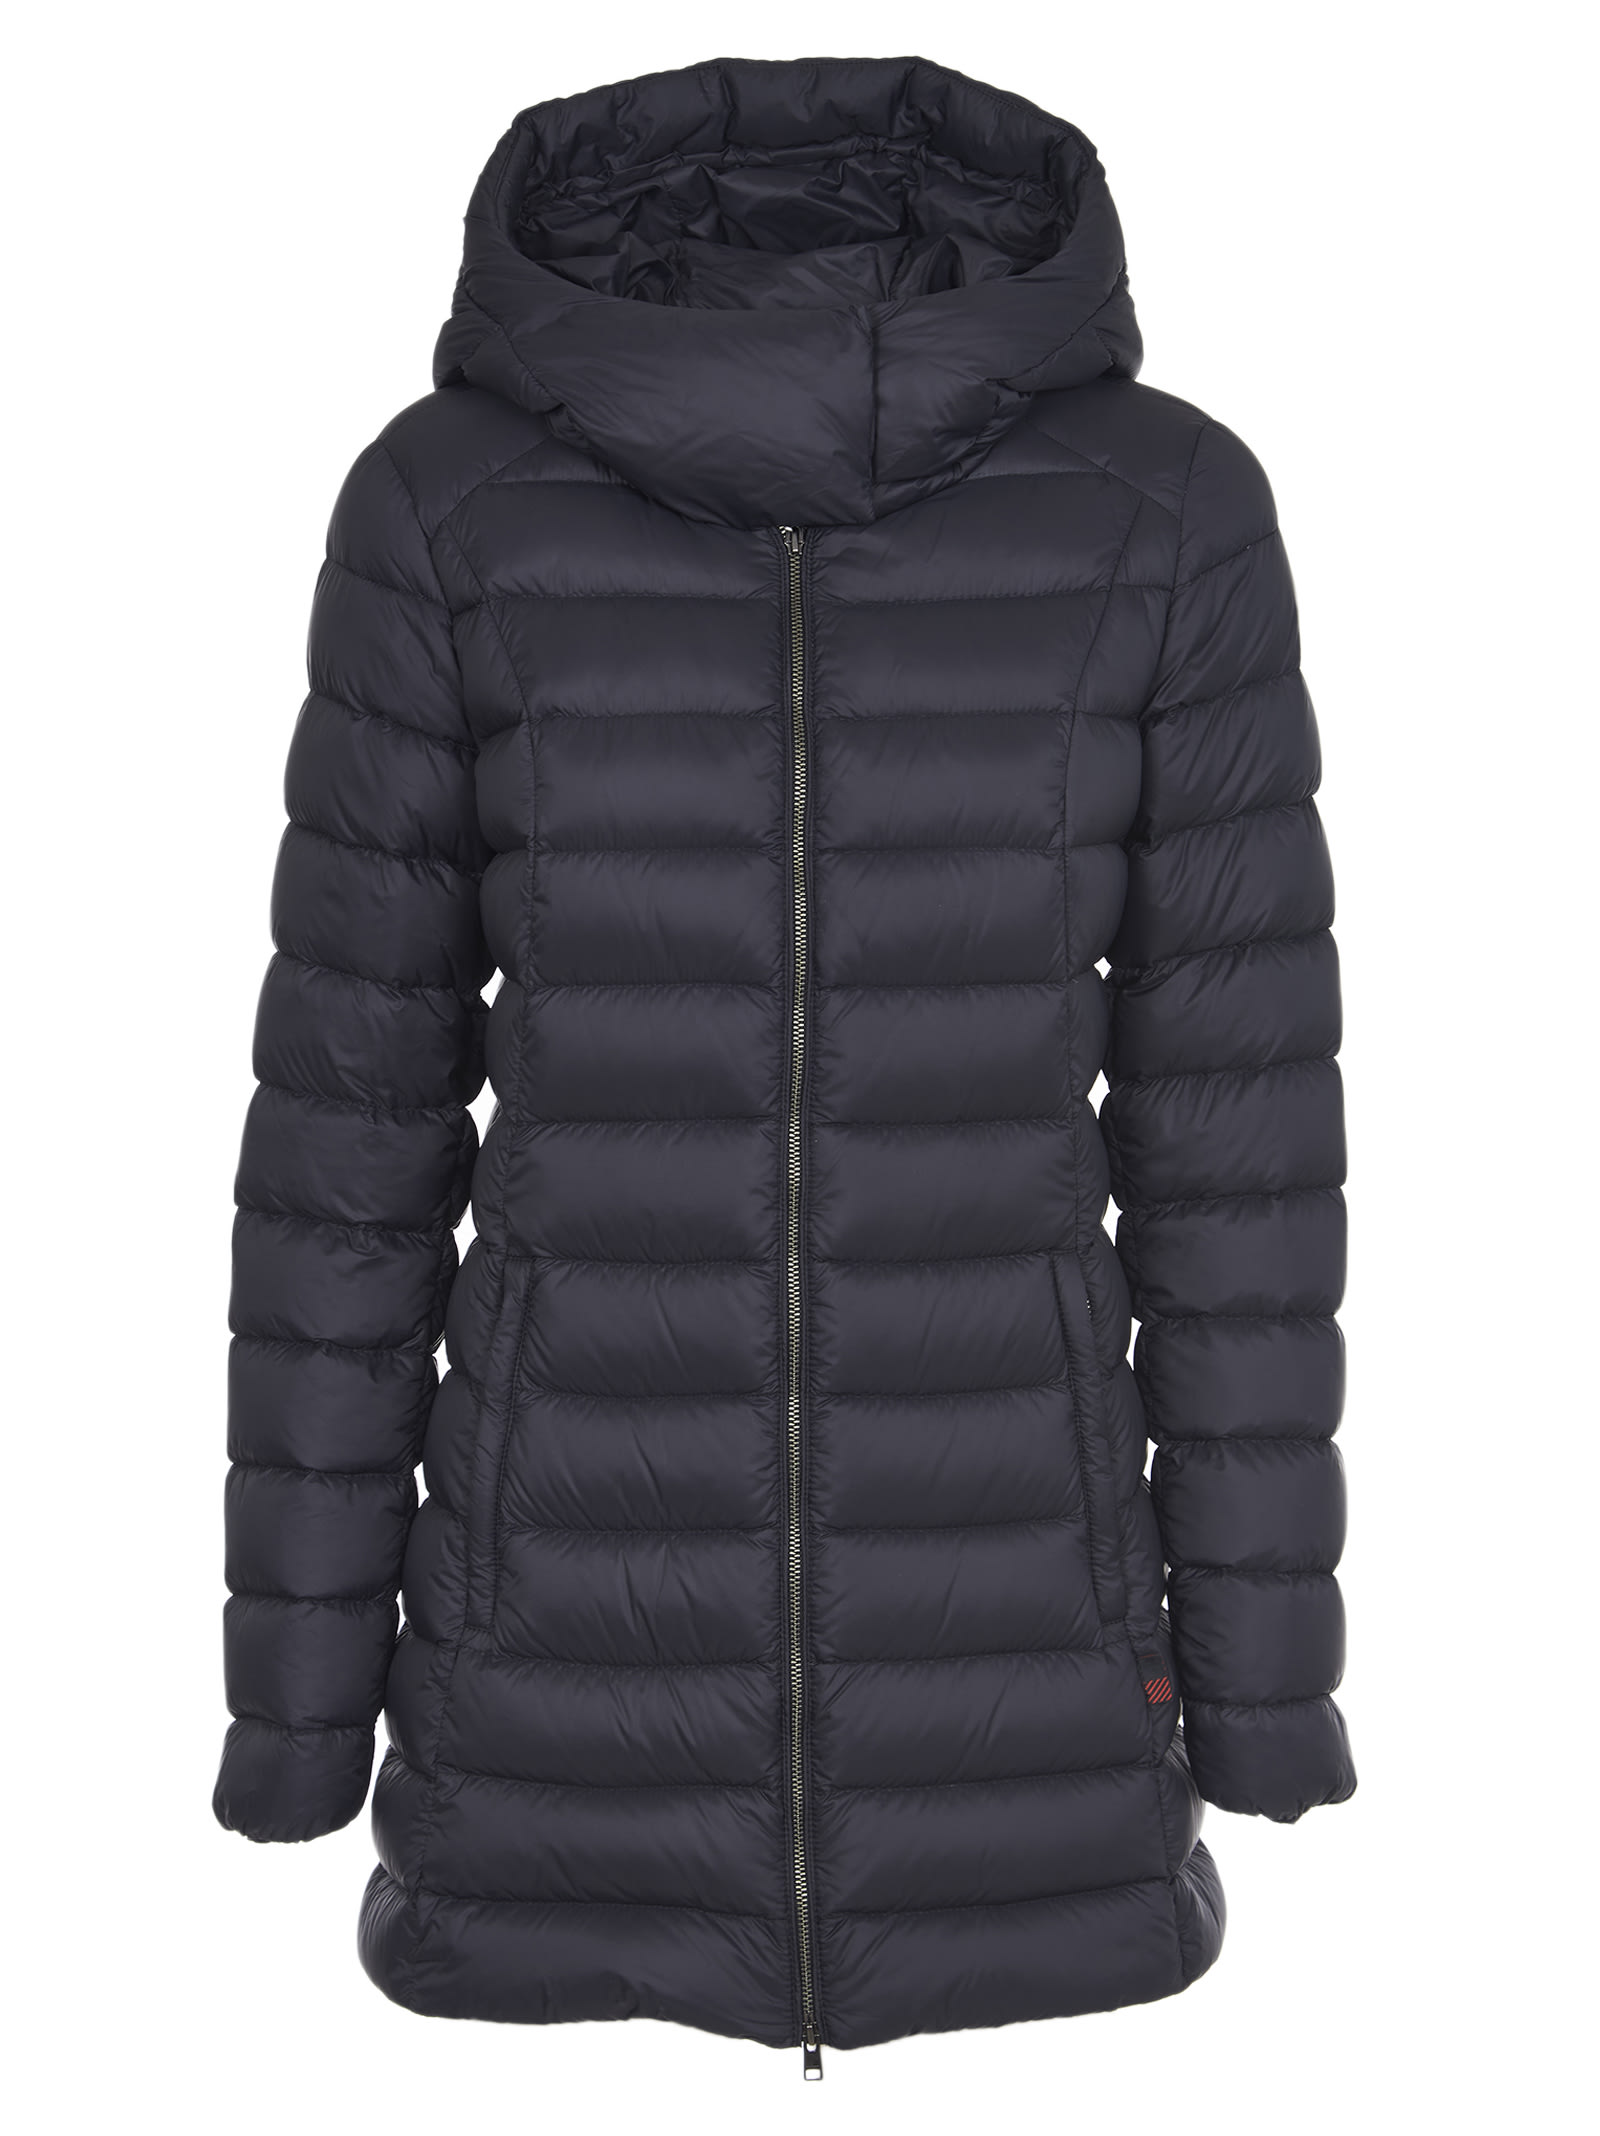 Woolrich Black Down Jacket With Hood